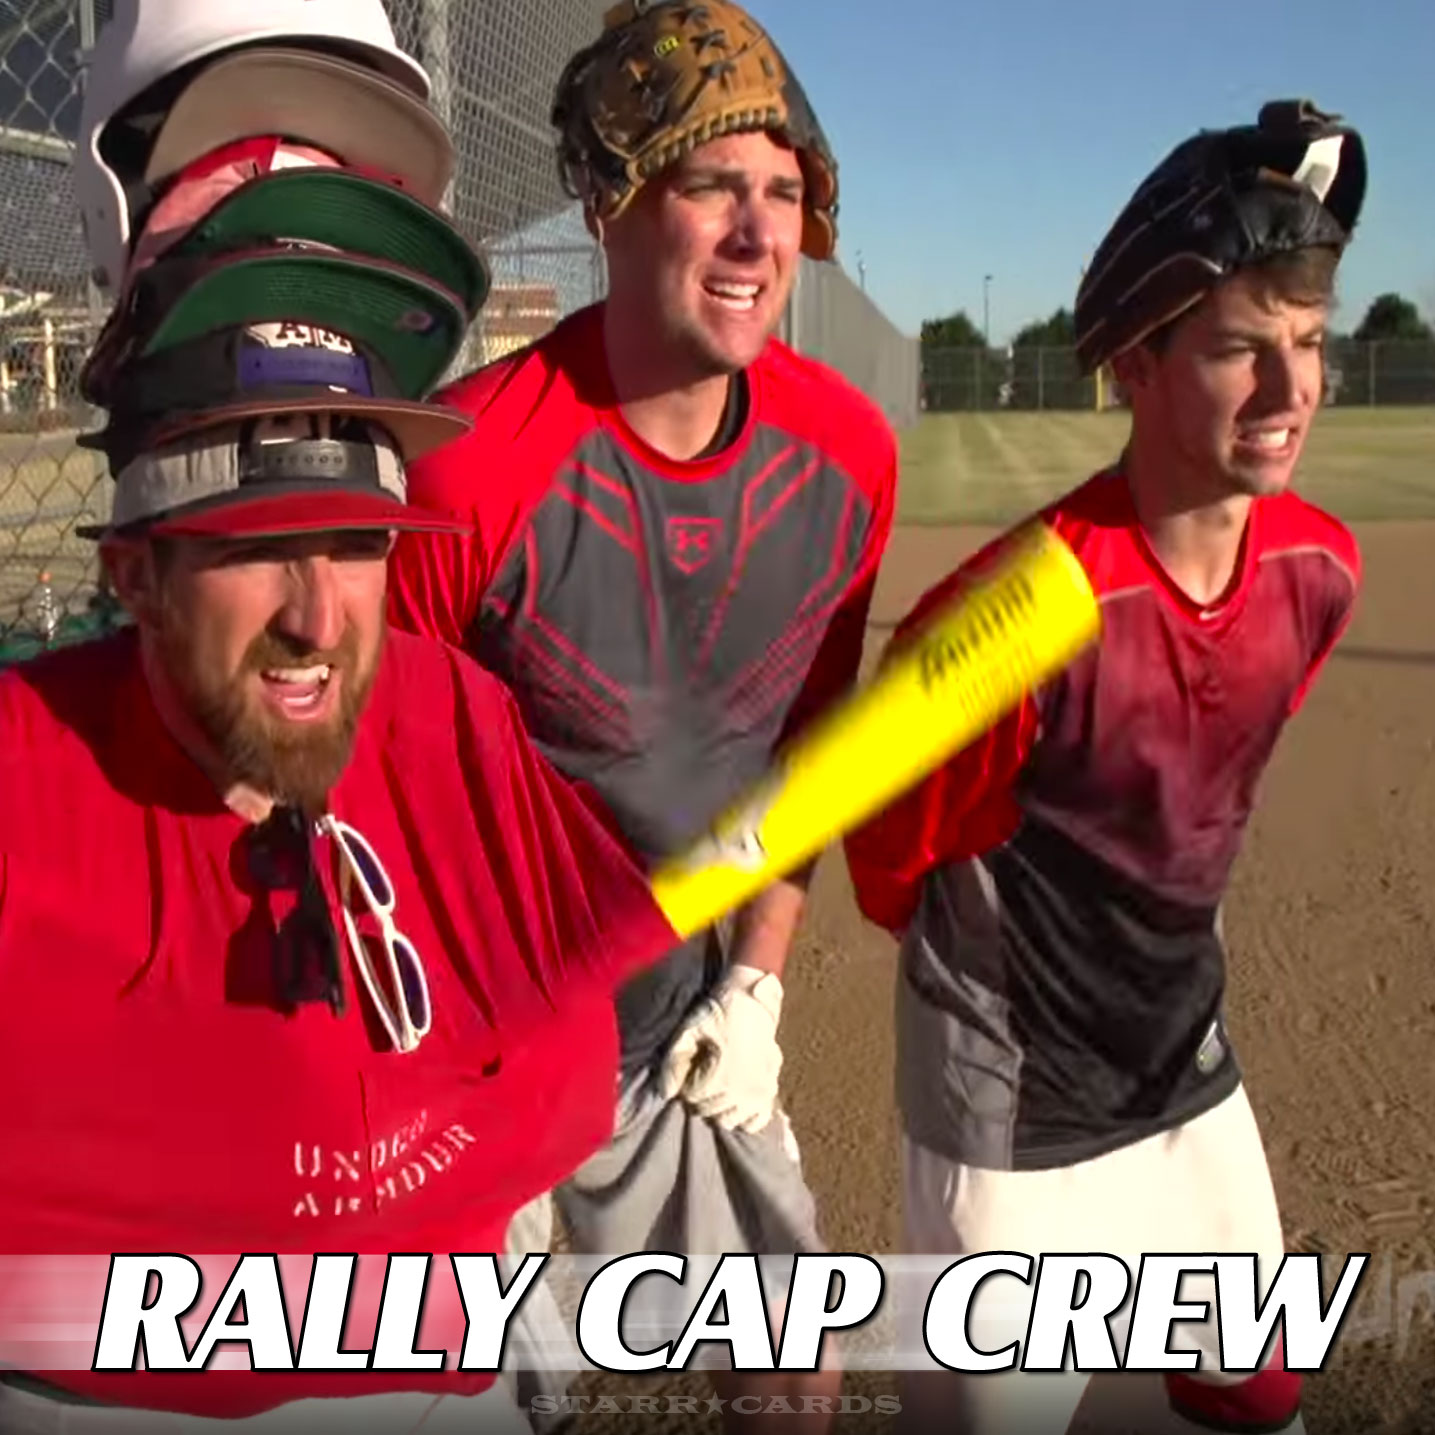 Dude Perfect explores softball stereotypes